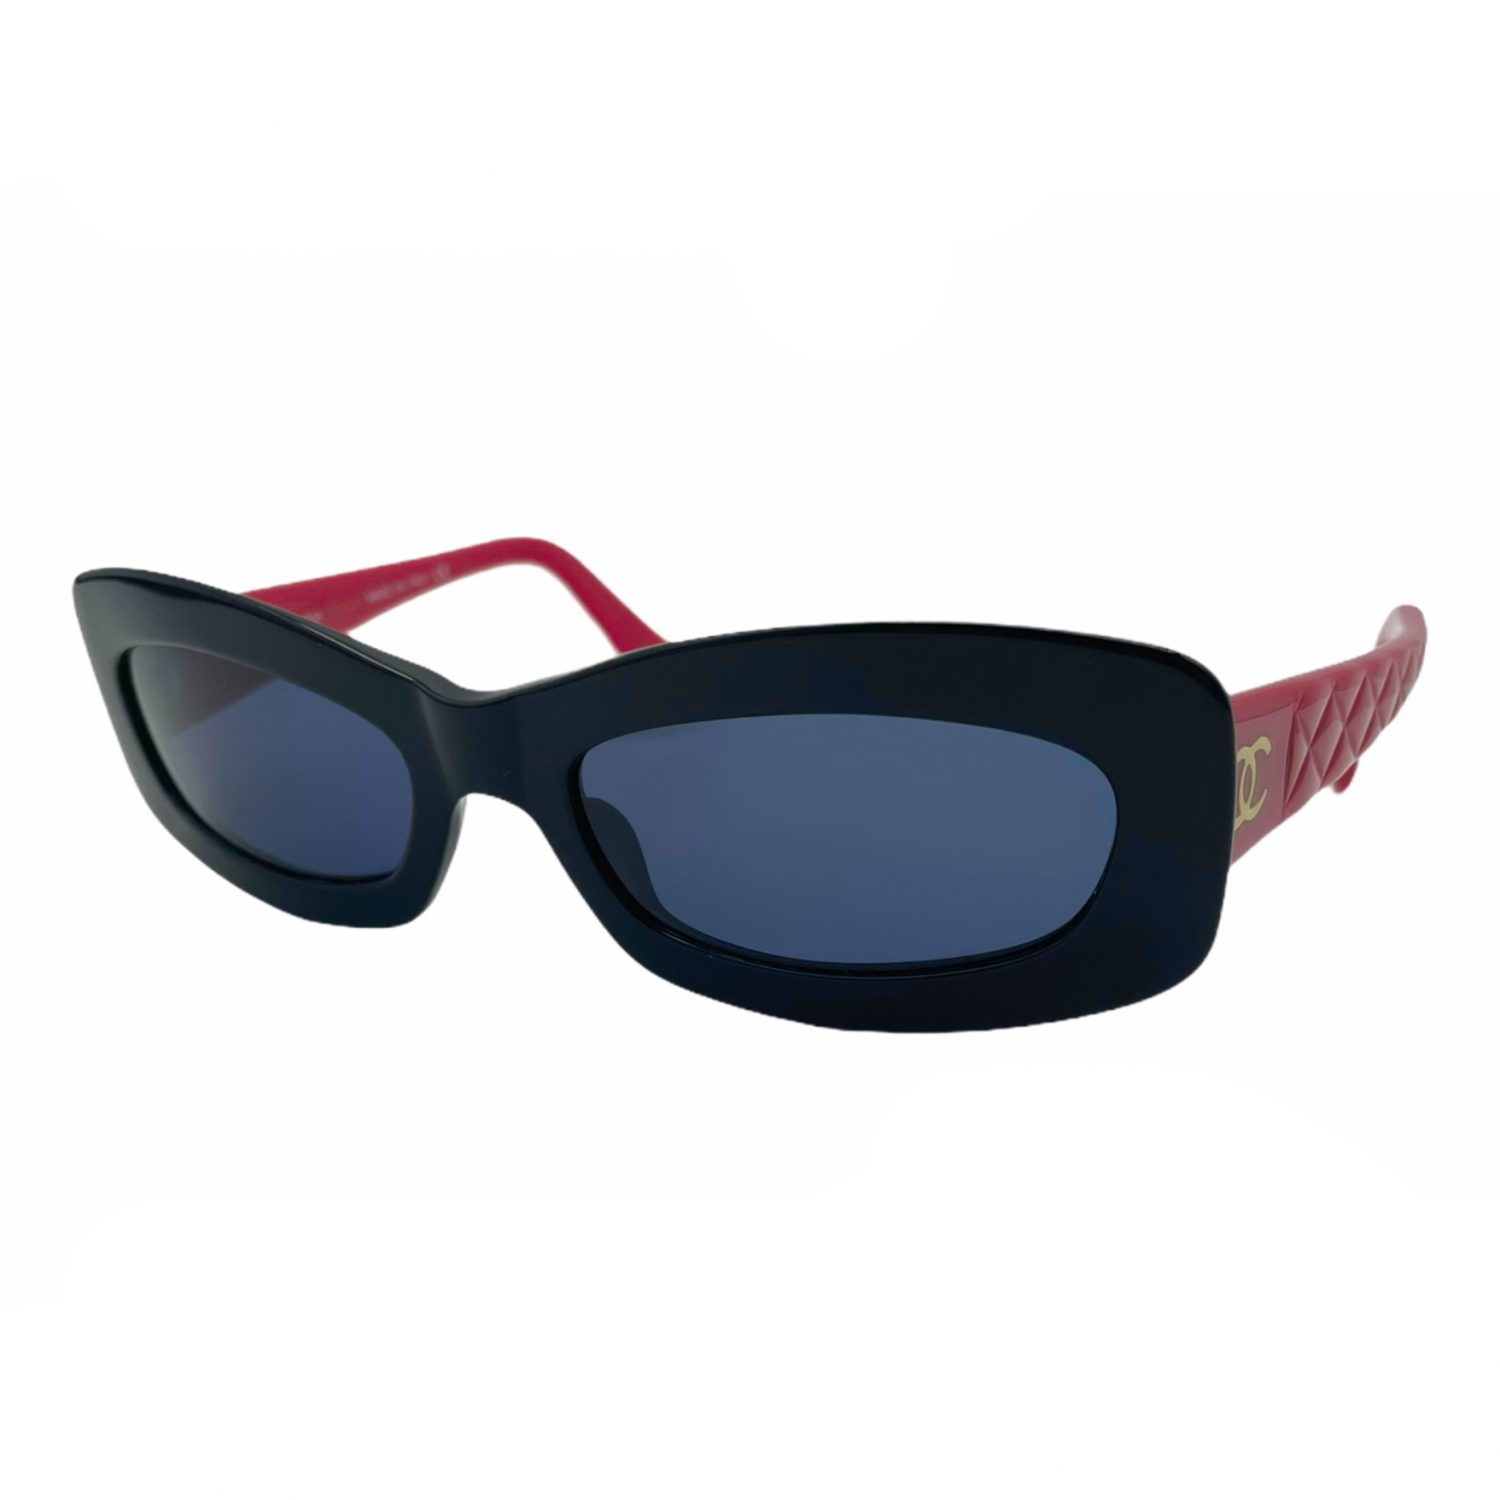 Vintage Chanel Chunky Sunglasses in Red and Black | NITRYL